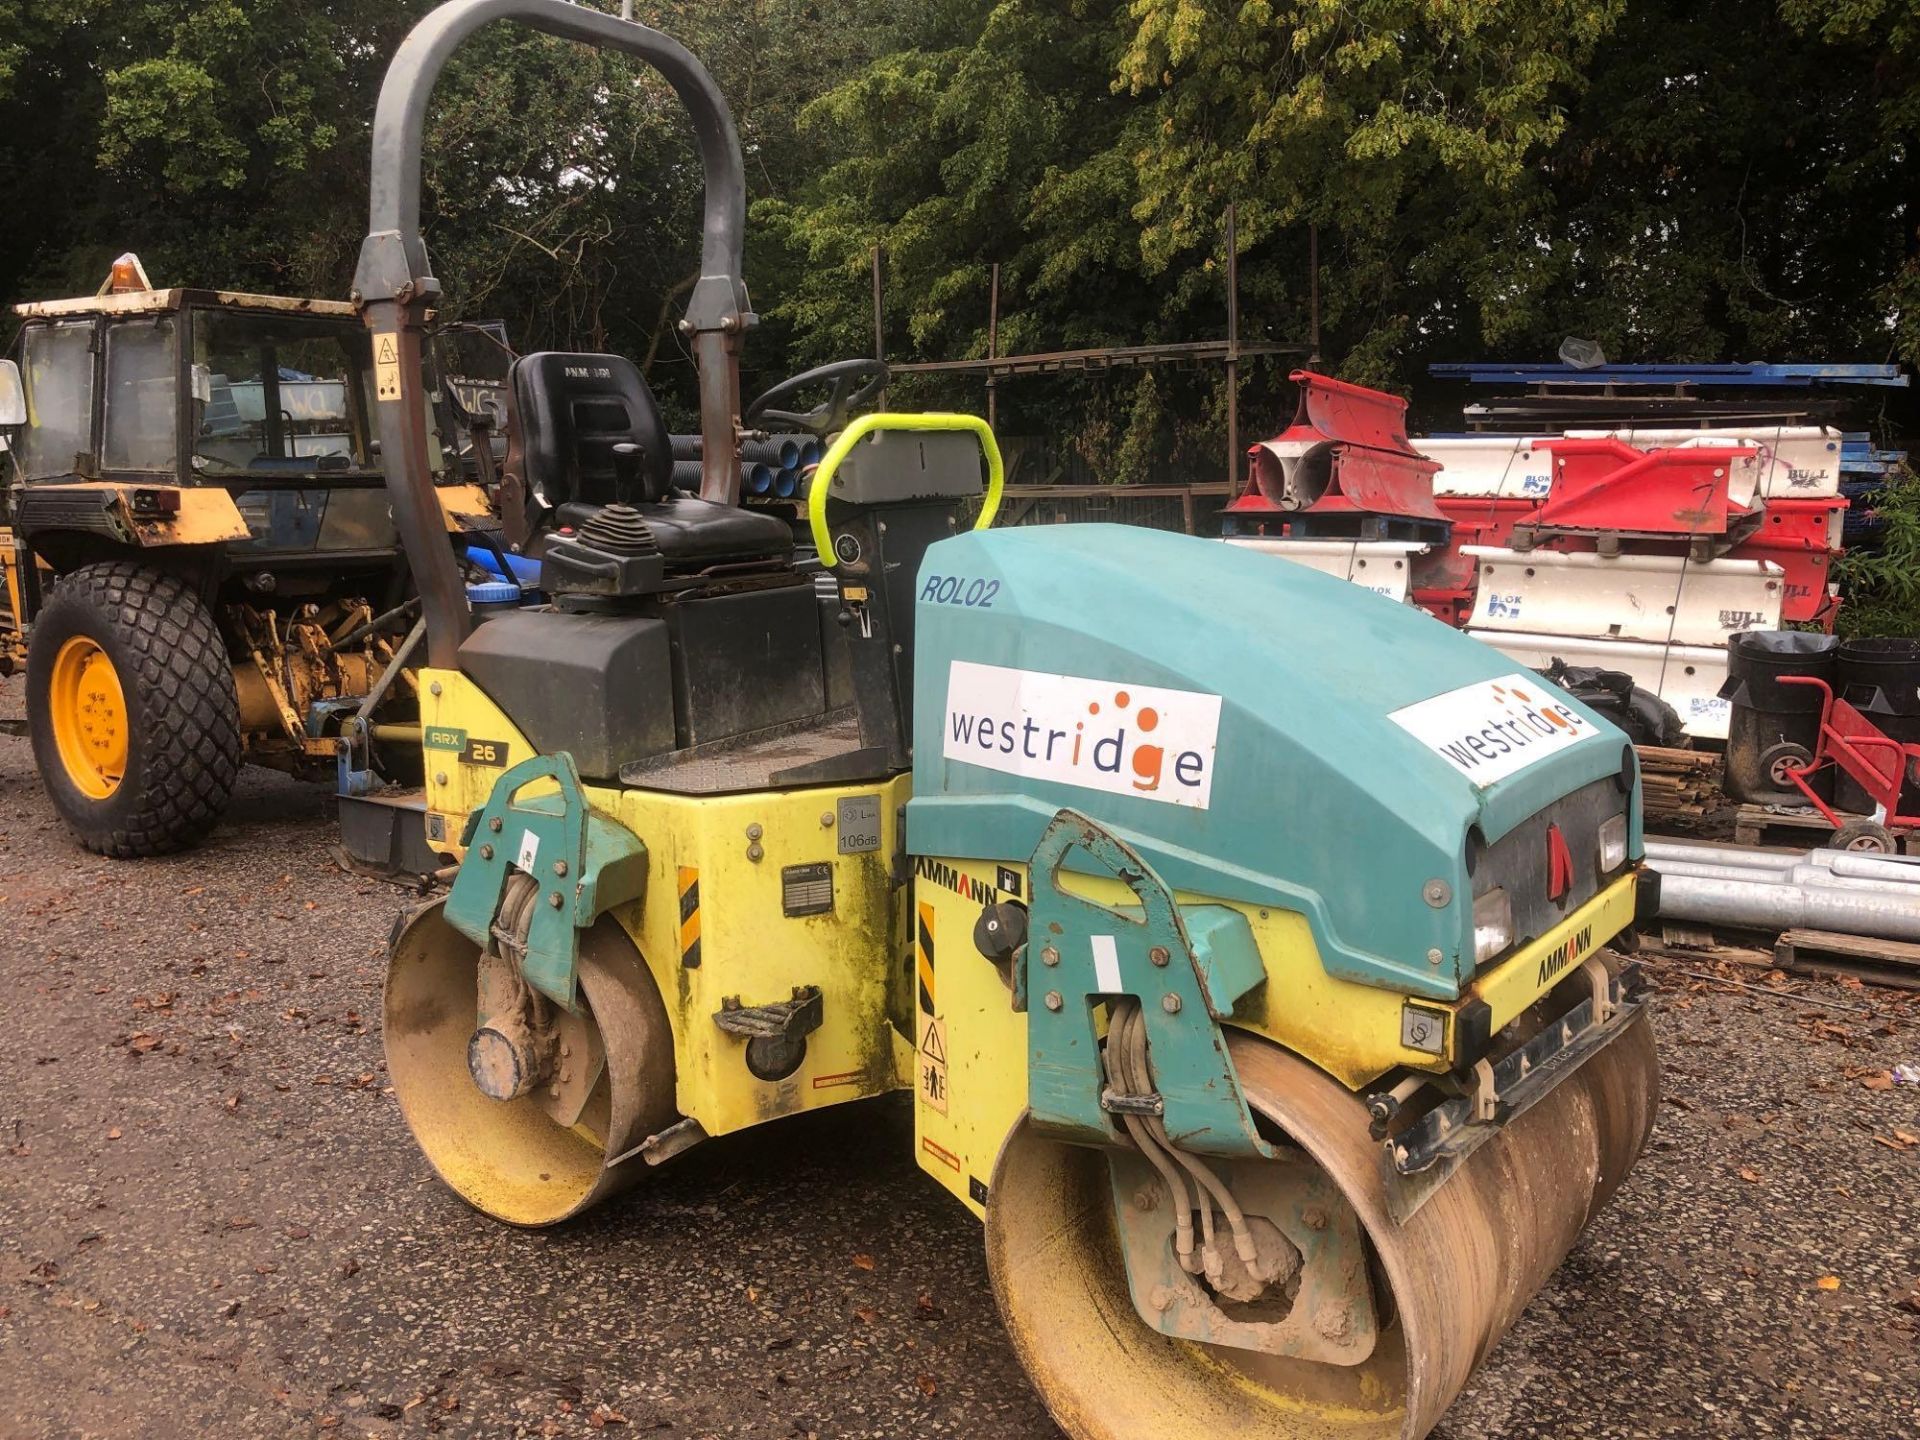 Ammann articulated tandem roller type ARX26 CWL No ROL2, s/n 6150340 recorded hours 734, Operating